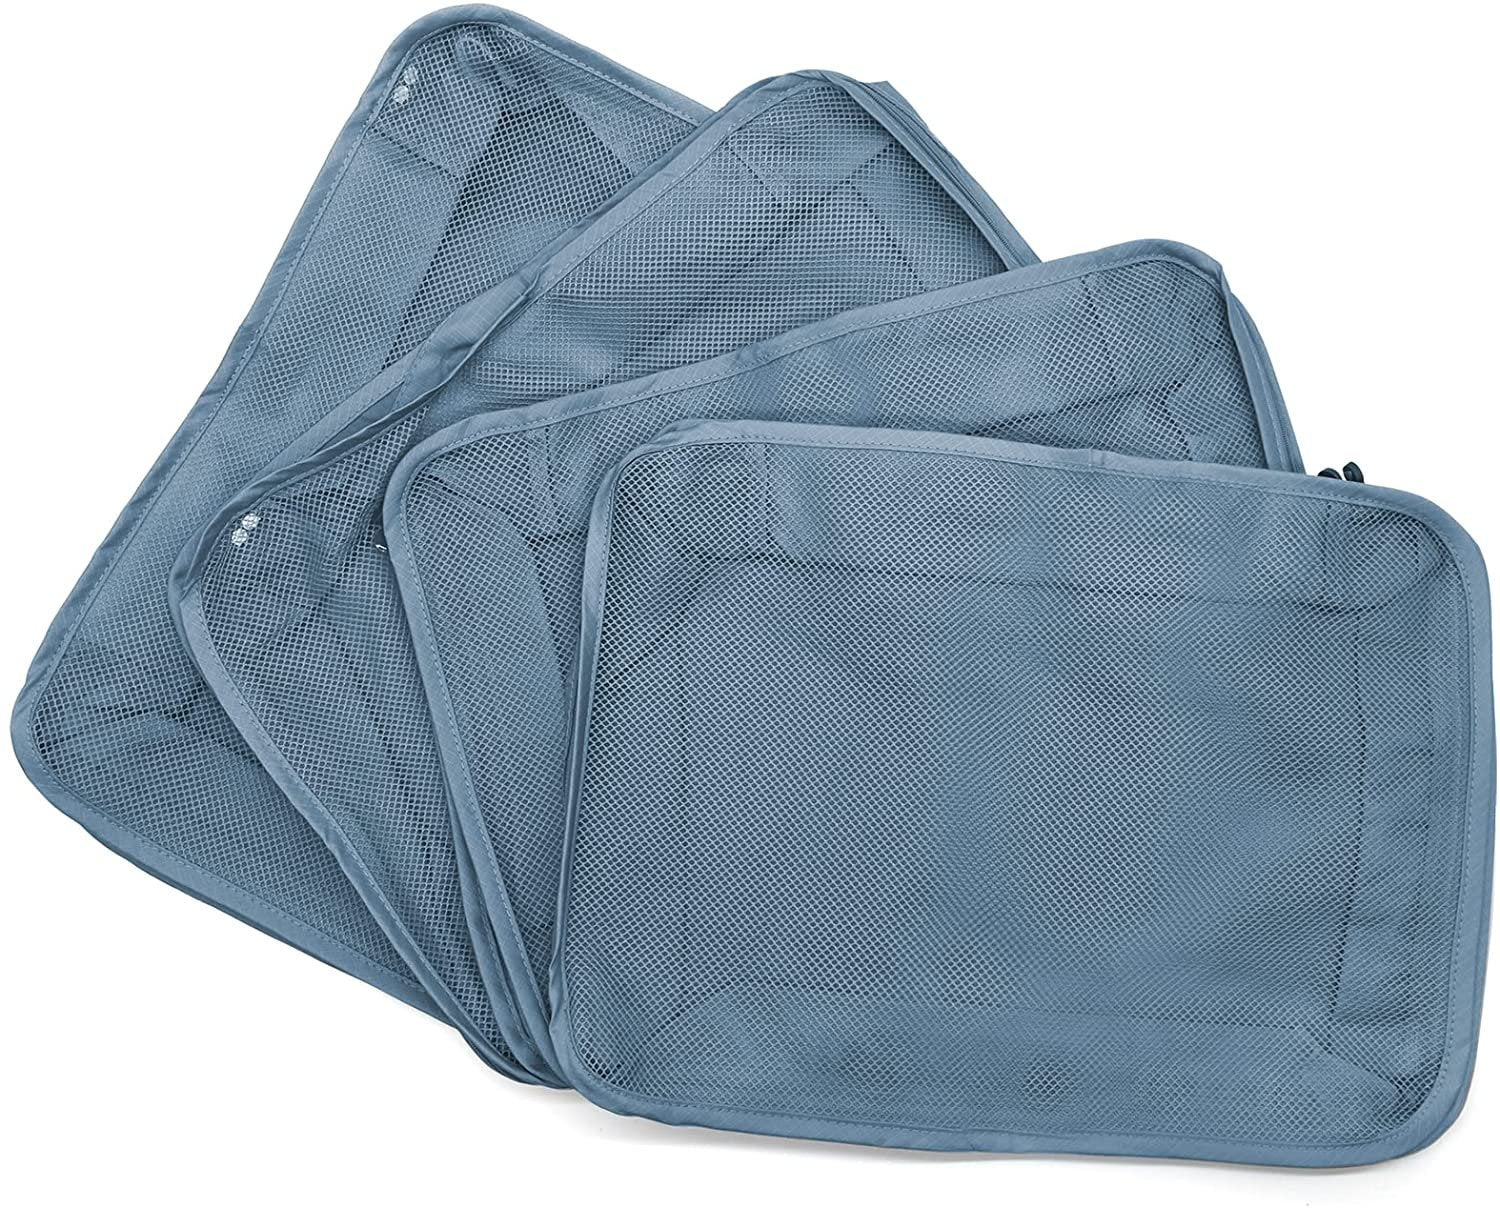 Large Periwinkle Blue Packing Cubes - 4 Pack, Nylon Luggage Organizer for Travel, Ultralight & High Capacity - 17.5x4x12.75